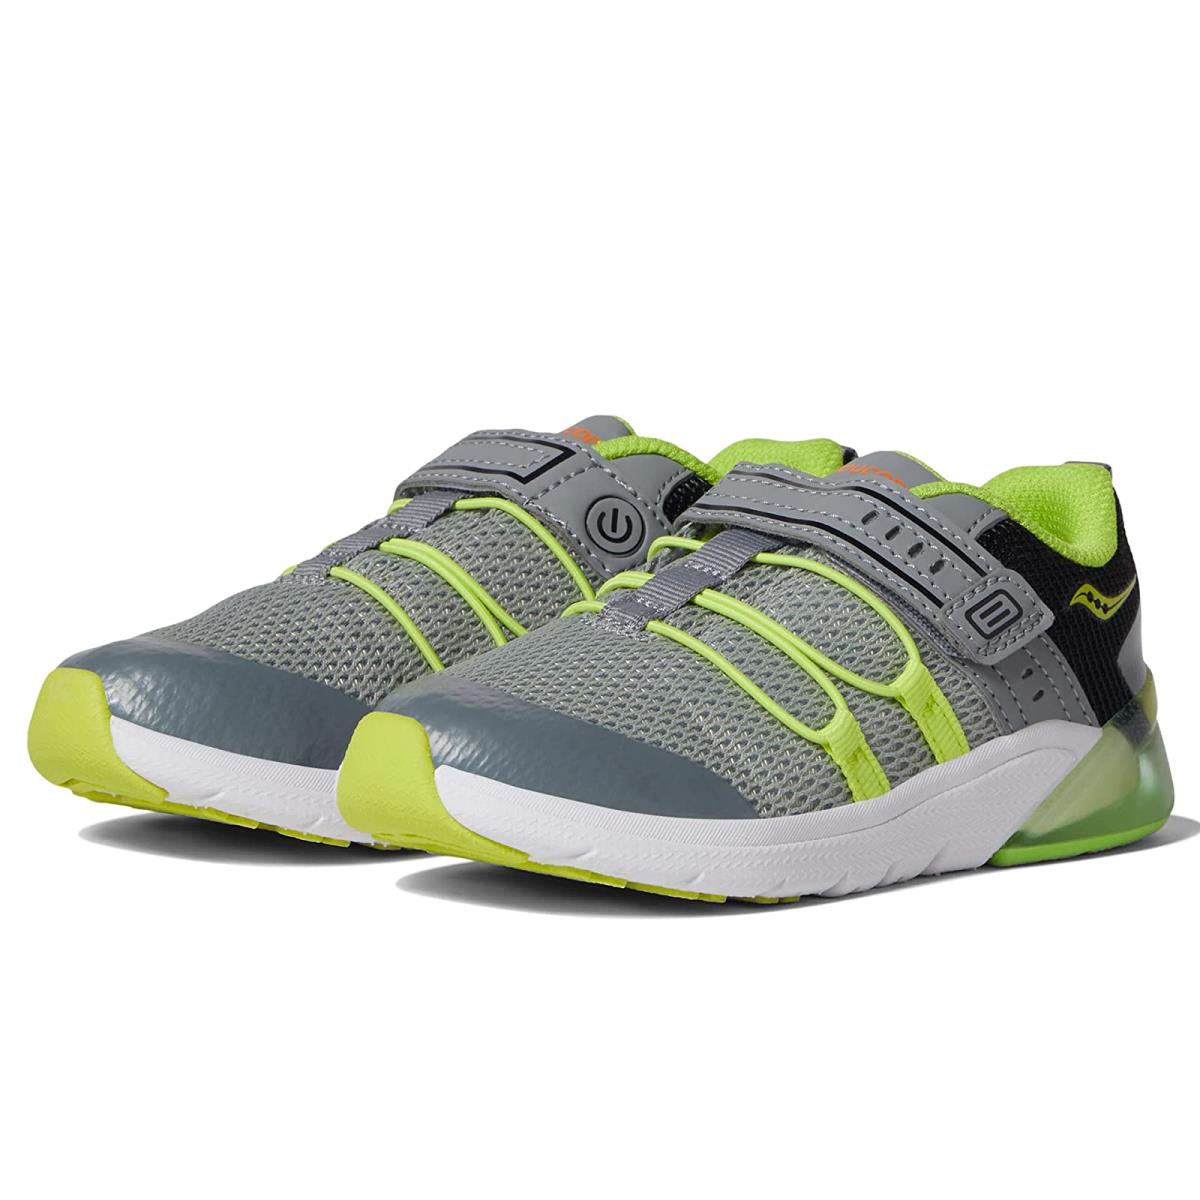 Boy`s Sneakers Athletic Shoes Saucony Kids Flash Glow 2.0 Toddler Grey/Lime